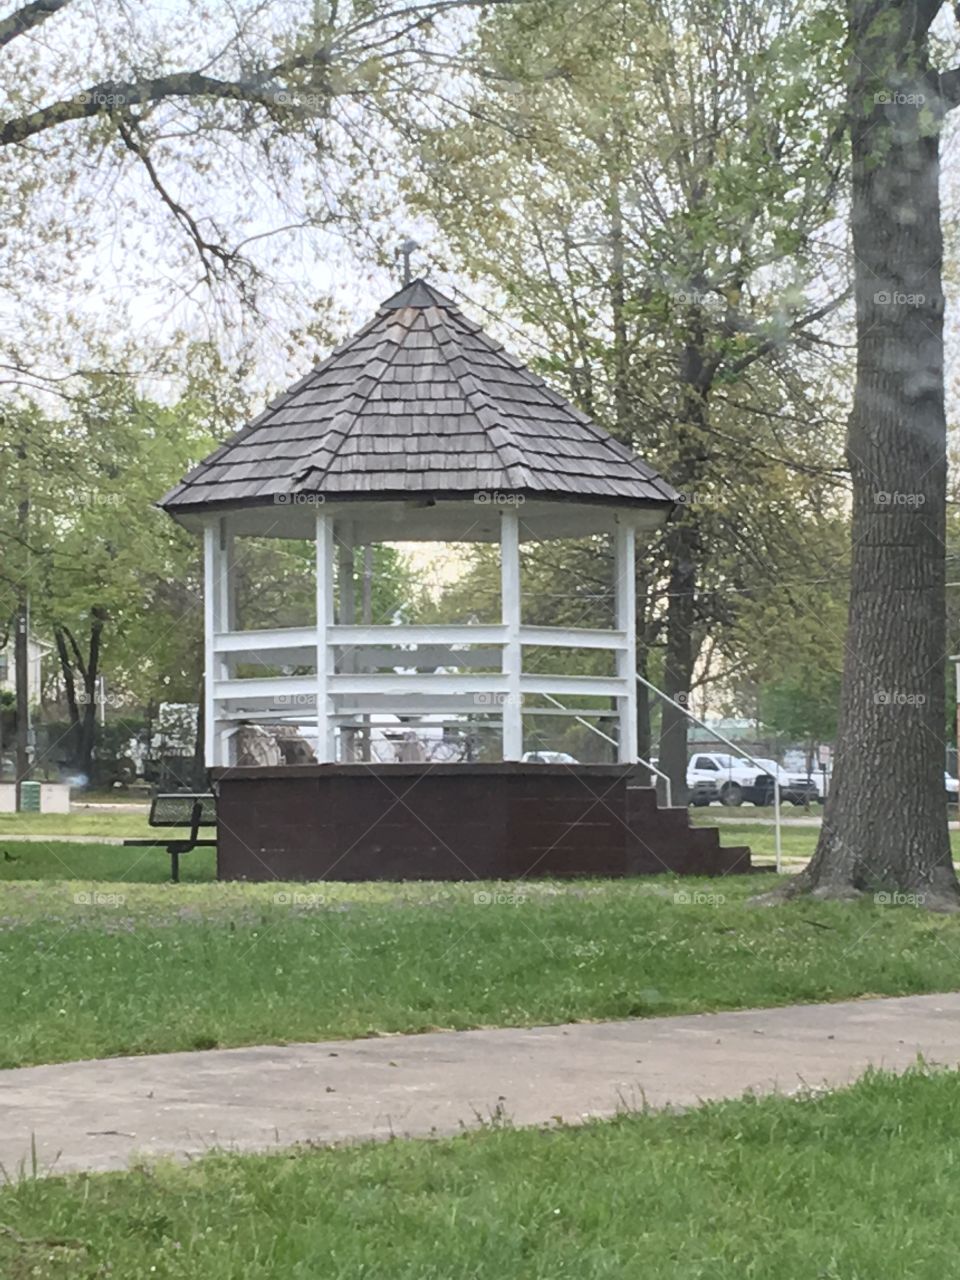 Gazebo down on the square in the town where we live. It’s a place where people gather.